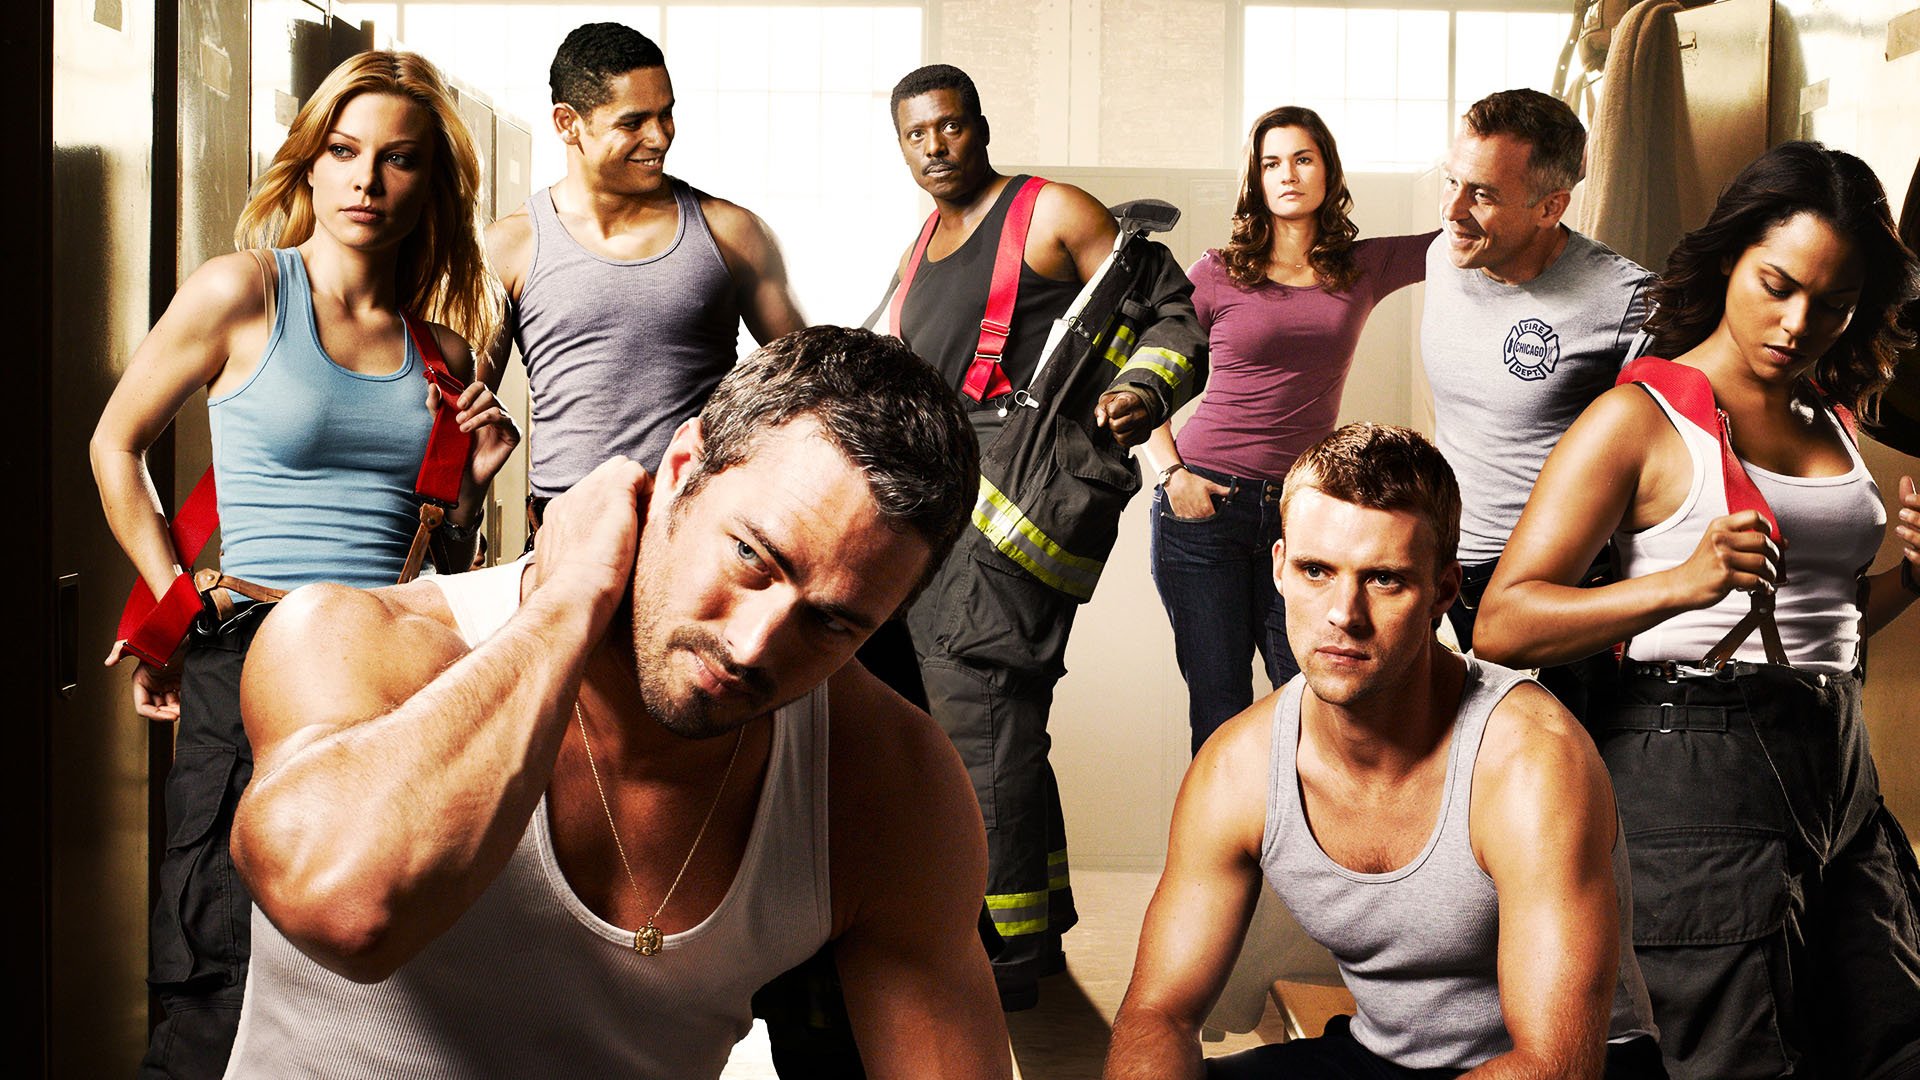 chicago, Fire, Action, Drama, Series Wallpaper